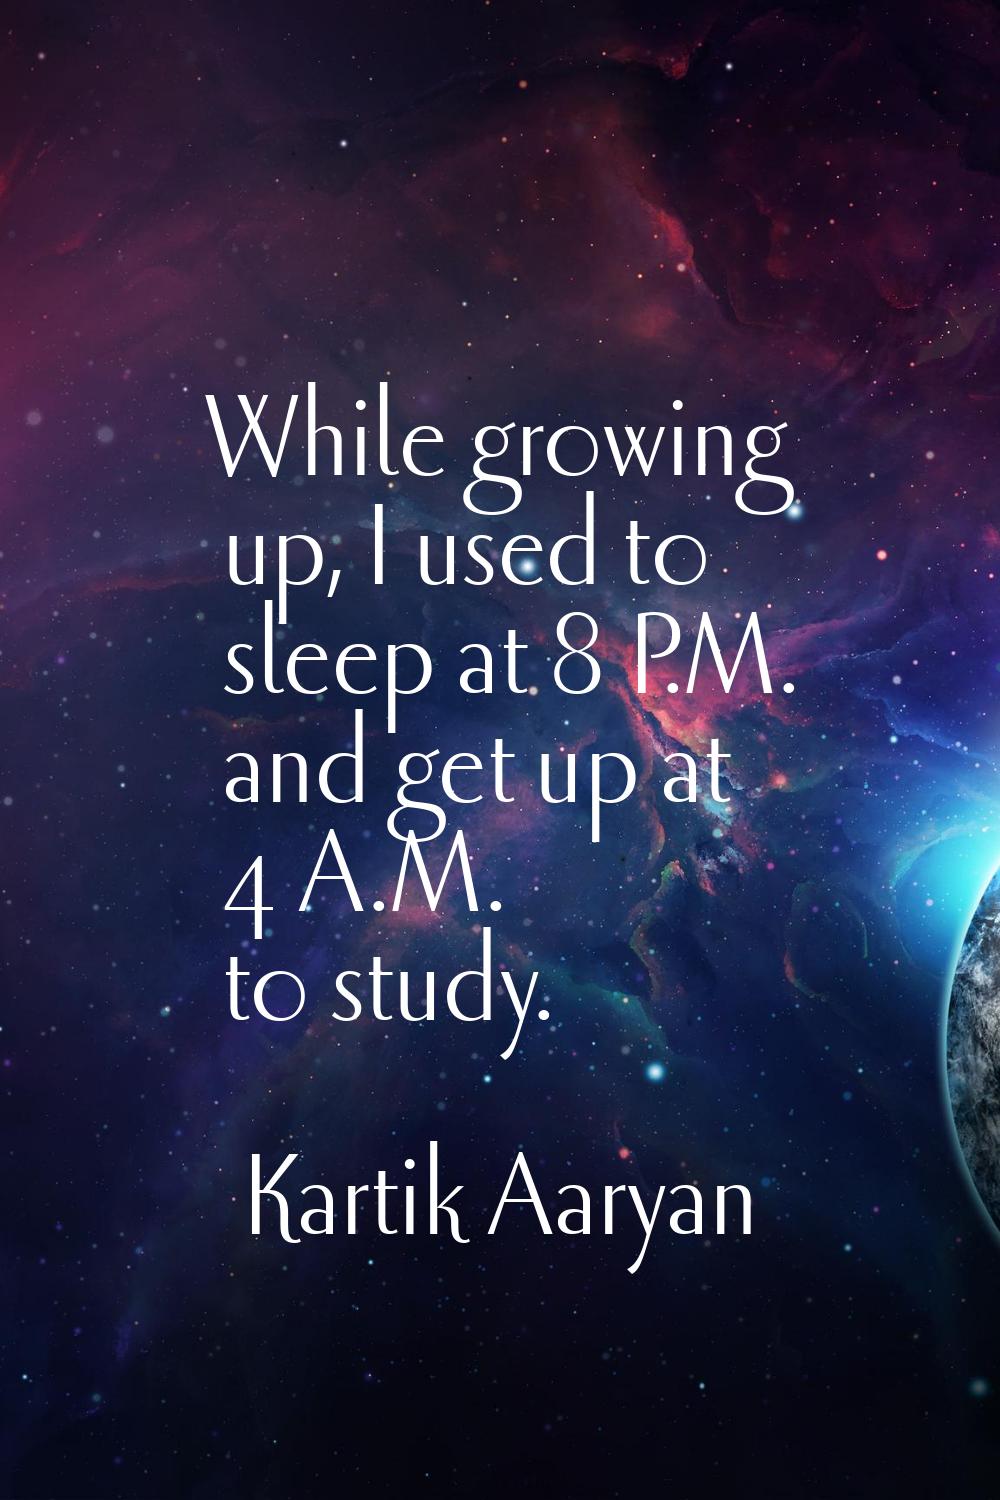 While growing up, I used to sleep at 8 P.M. and get up at 4 A.M. to study.